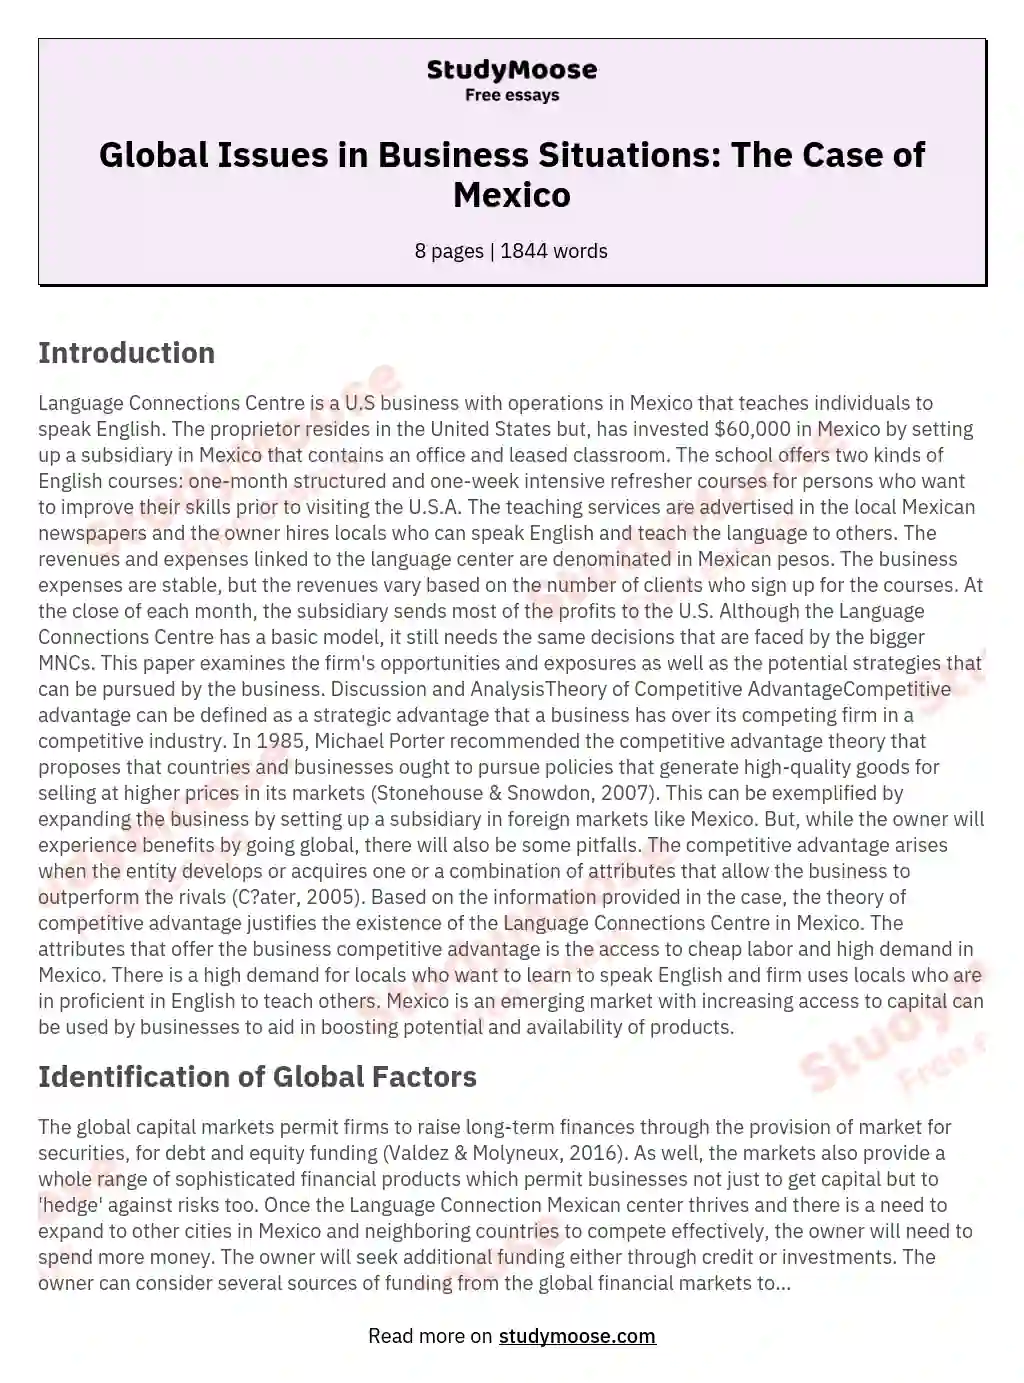 Global Issues in Business Situations: The Case of Mexico essay